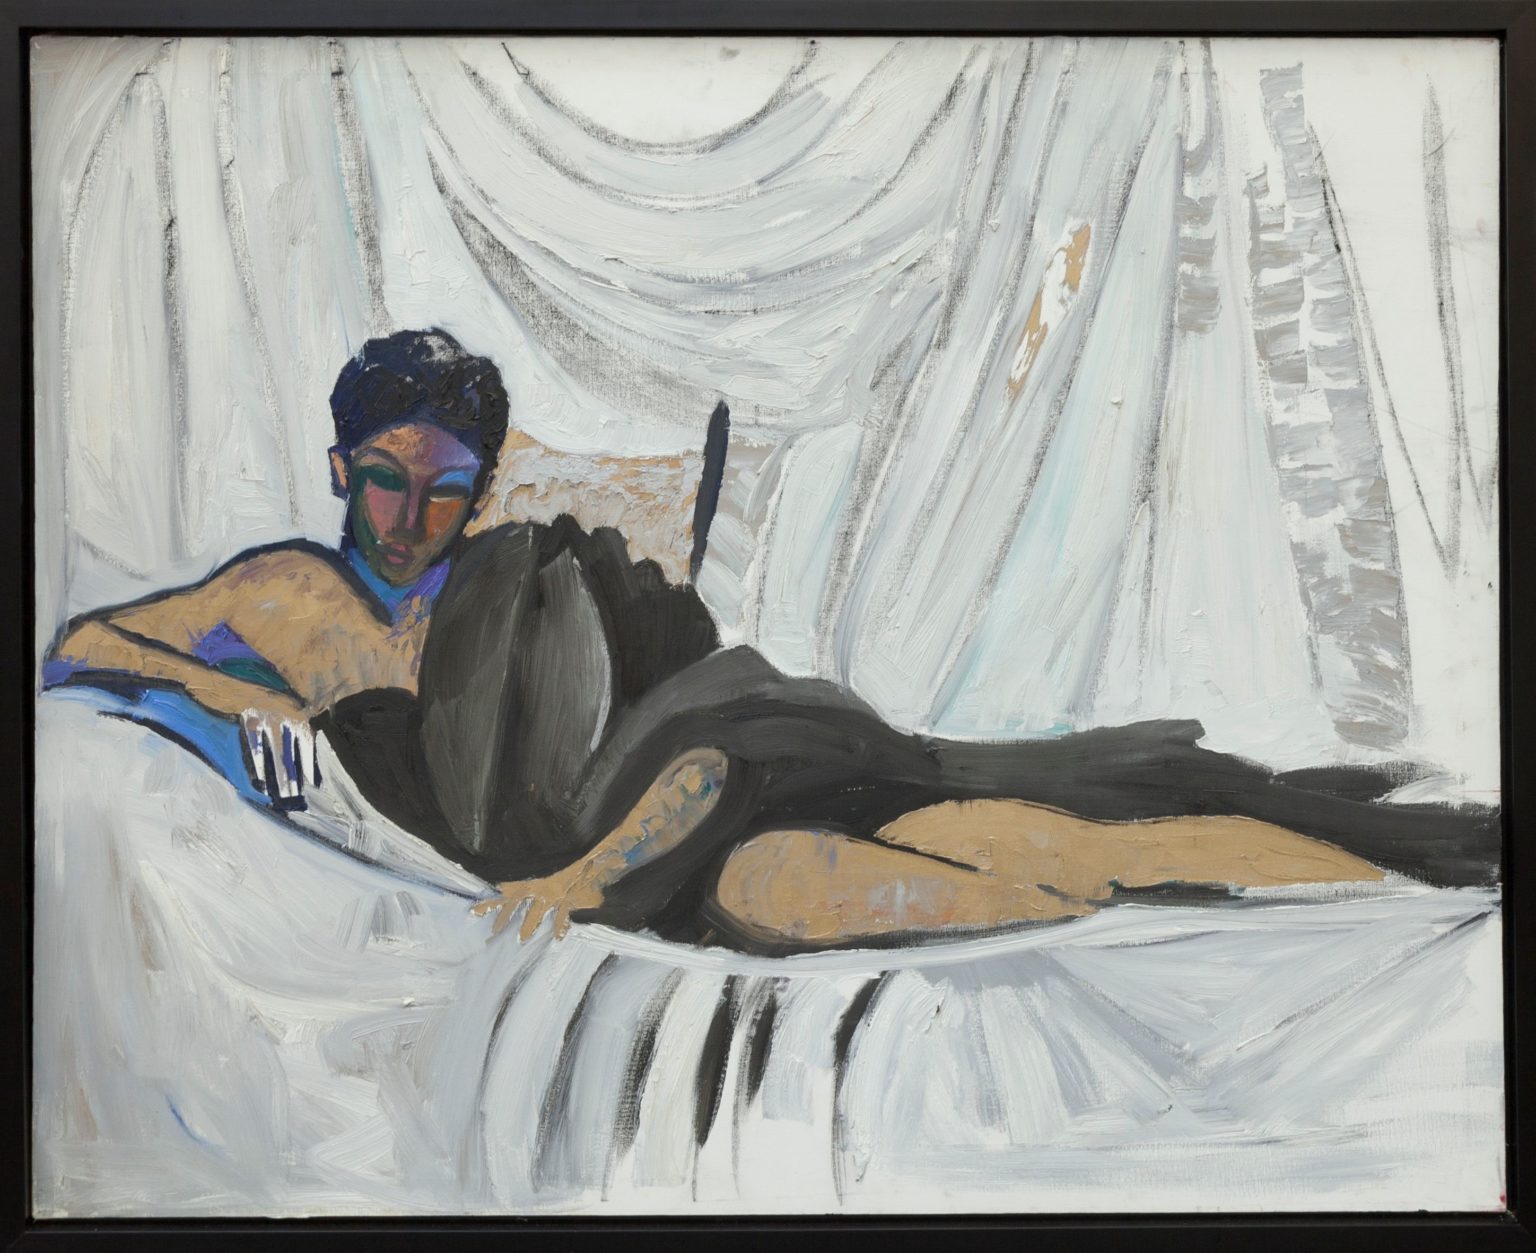 "Eve" by William Tolliver -- a painting of a woman reclined in white sheets